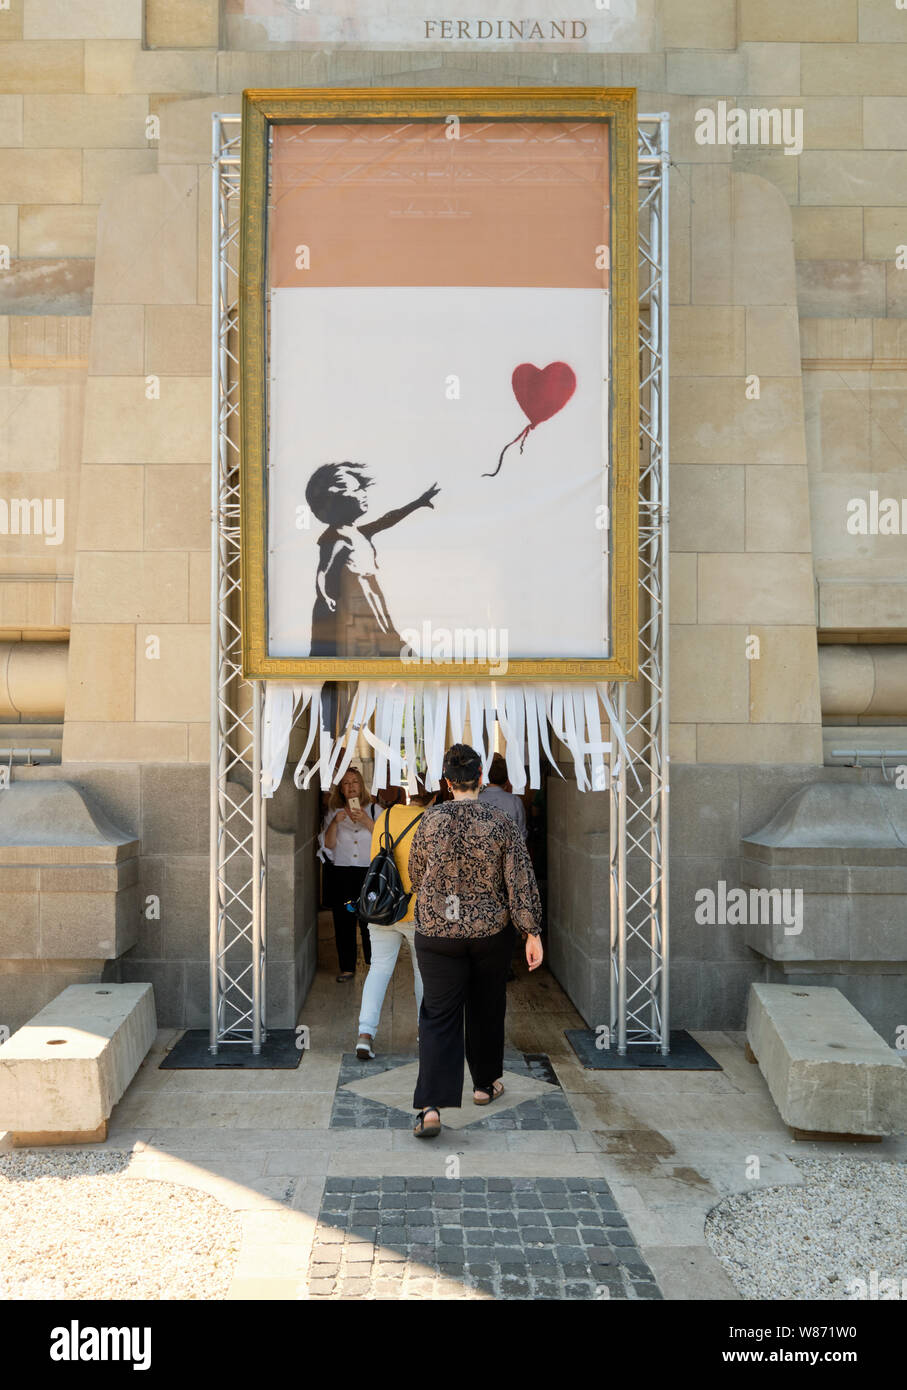 Entrance to the Banksy exhibit in Bucharest with image of girl with heart  balloon recreating the shredder effect Stock Photo - Alamy